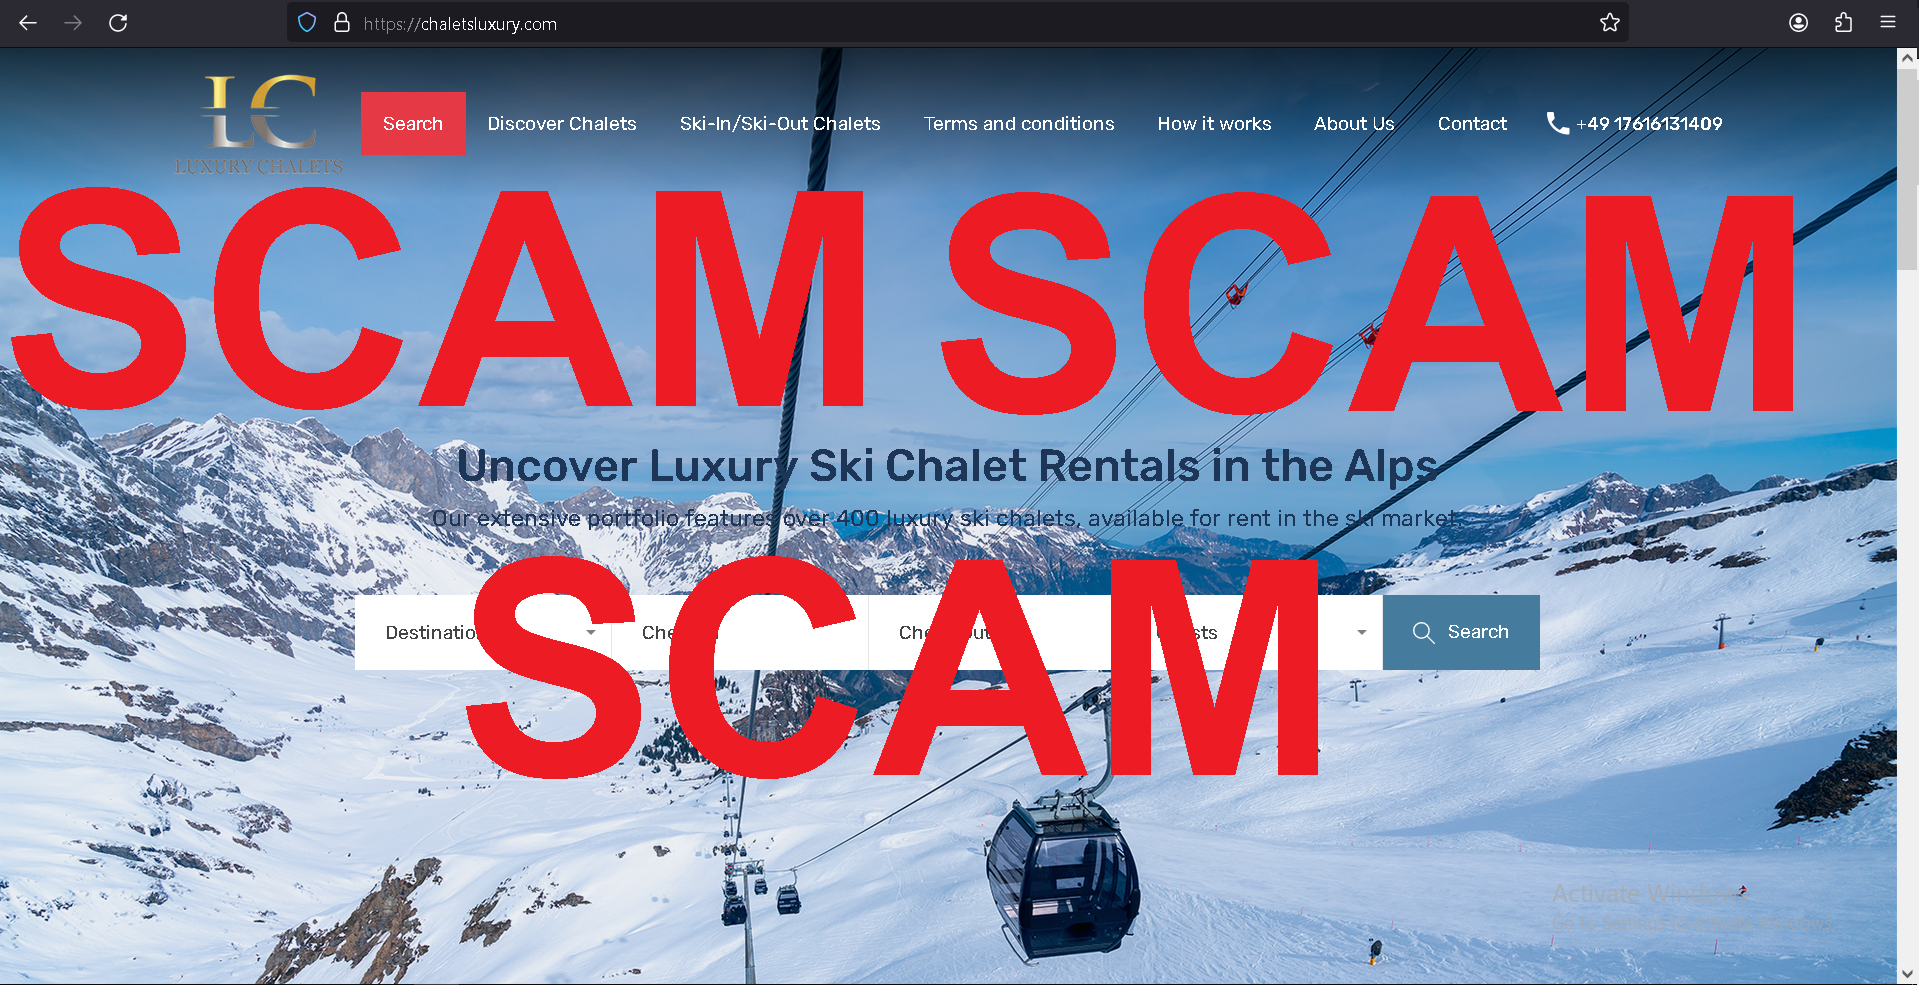 You are currently viewing Fraudulent website: chaletsluxury.com SCAM SCAM